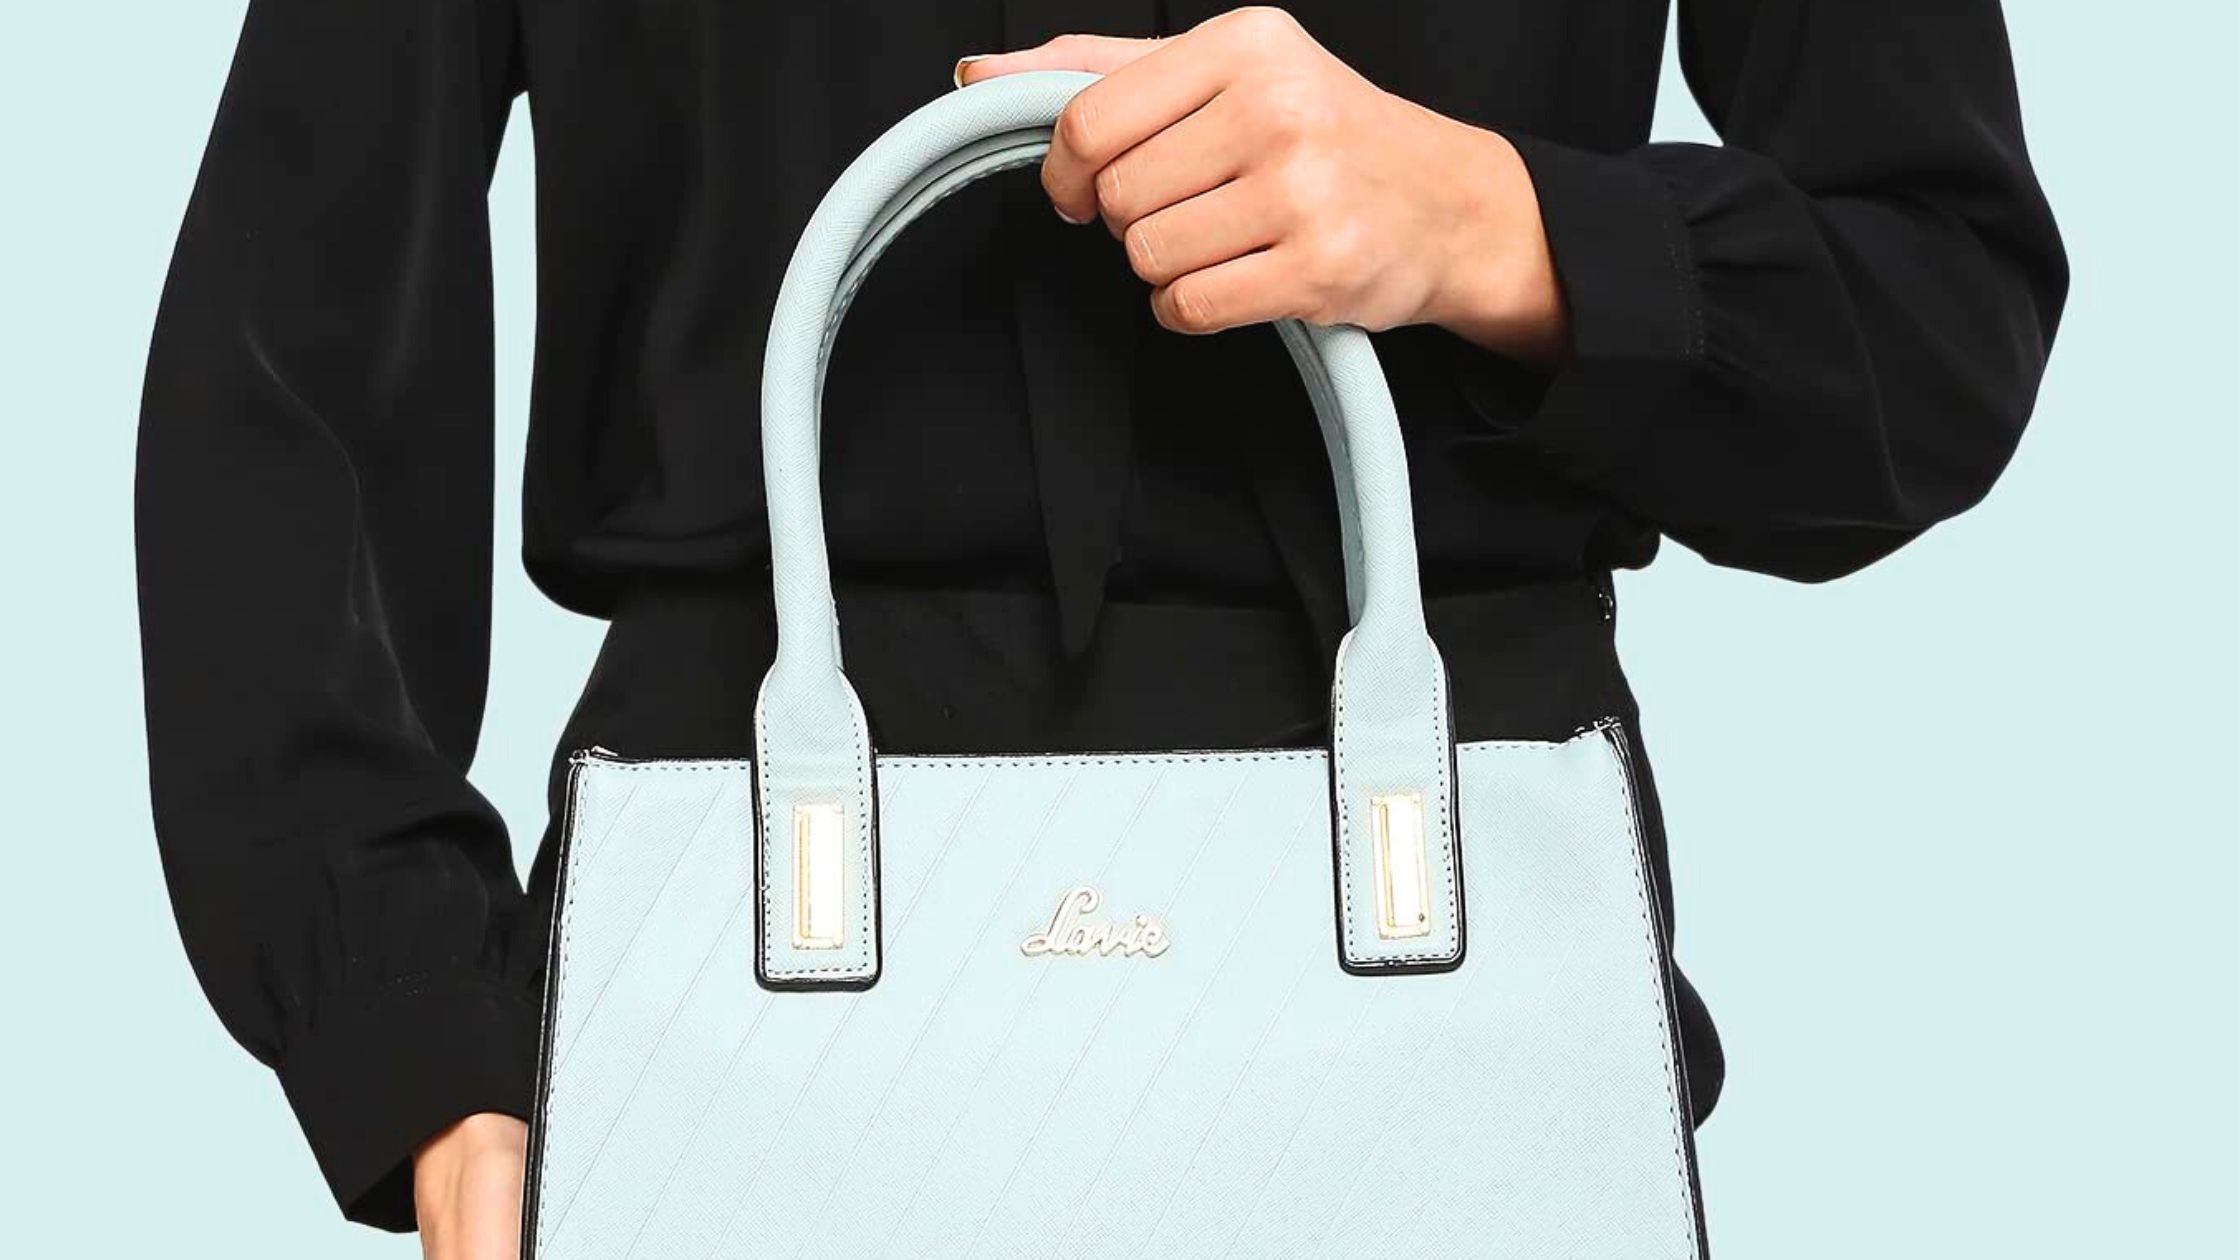 8 Lavie Handbags that will make you stand Apart